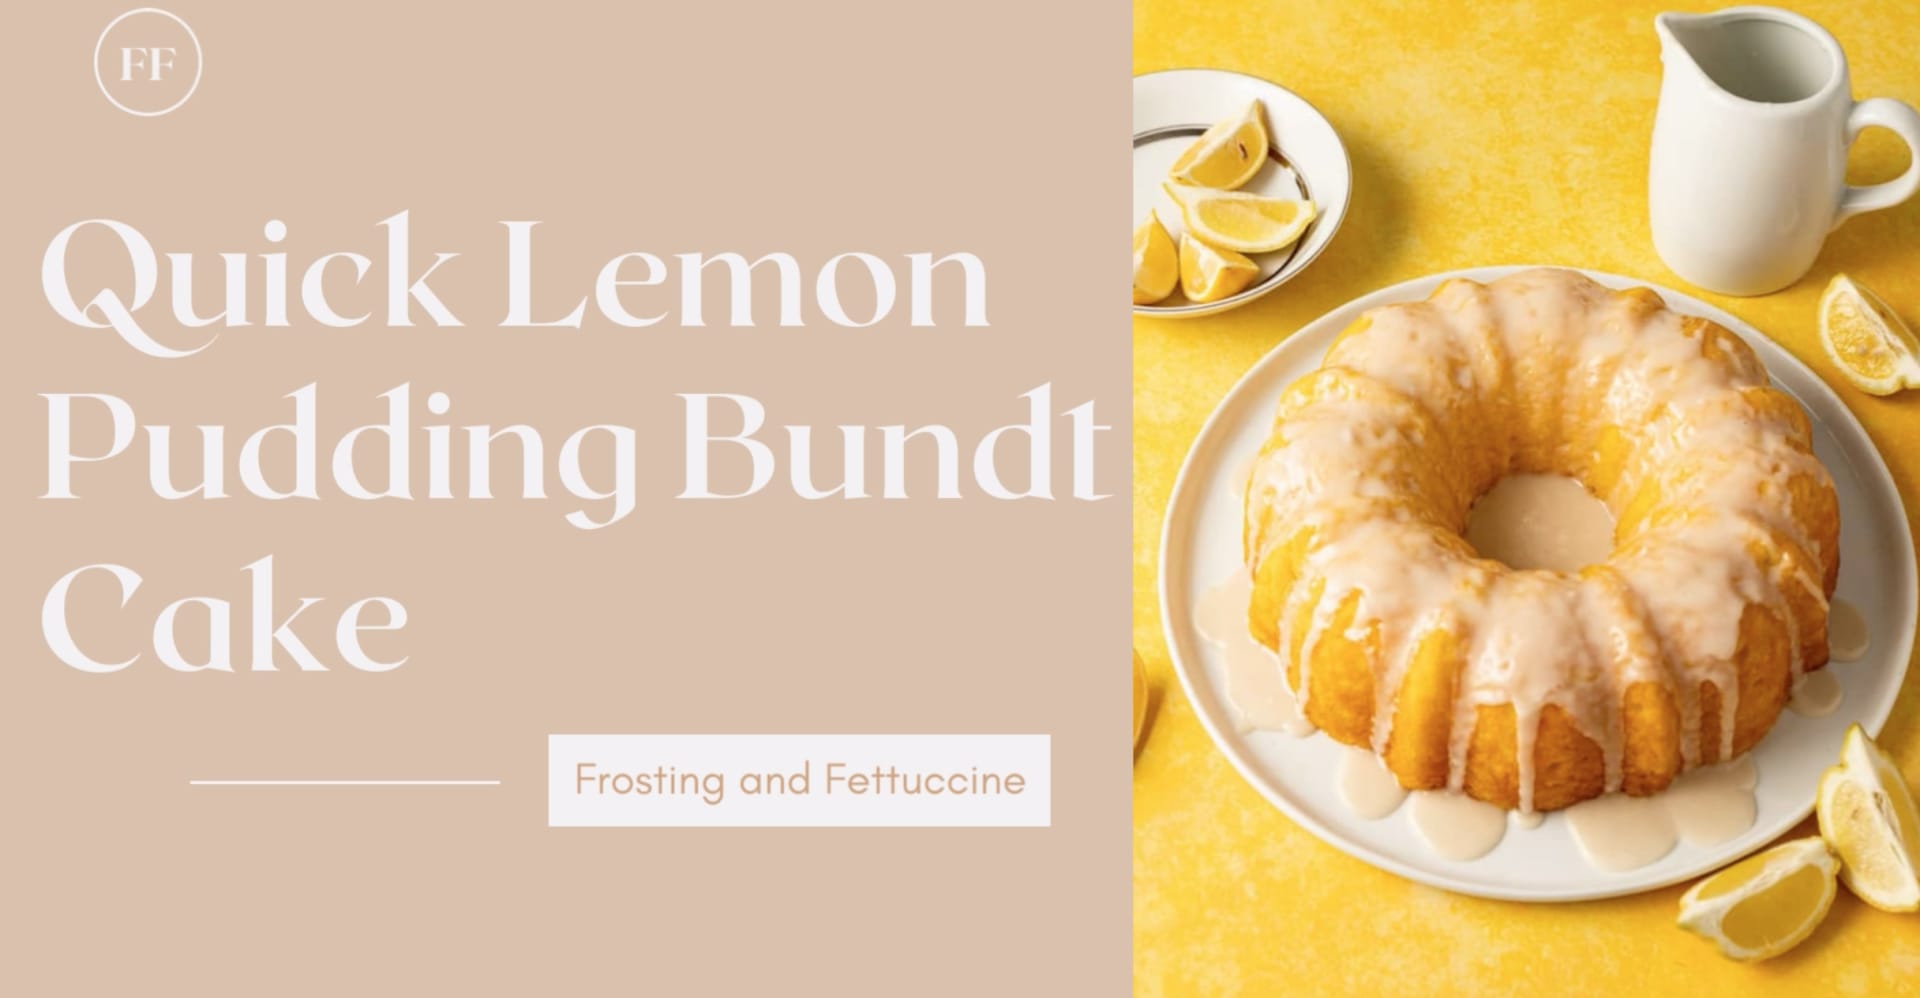 Easy and Moist Mini Bundt Cakes - Frosting and Fettuccine